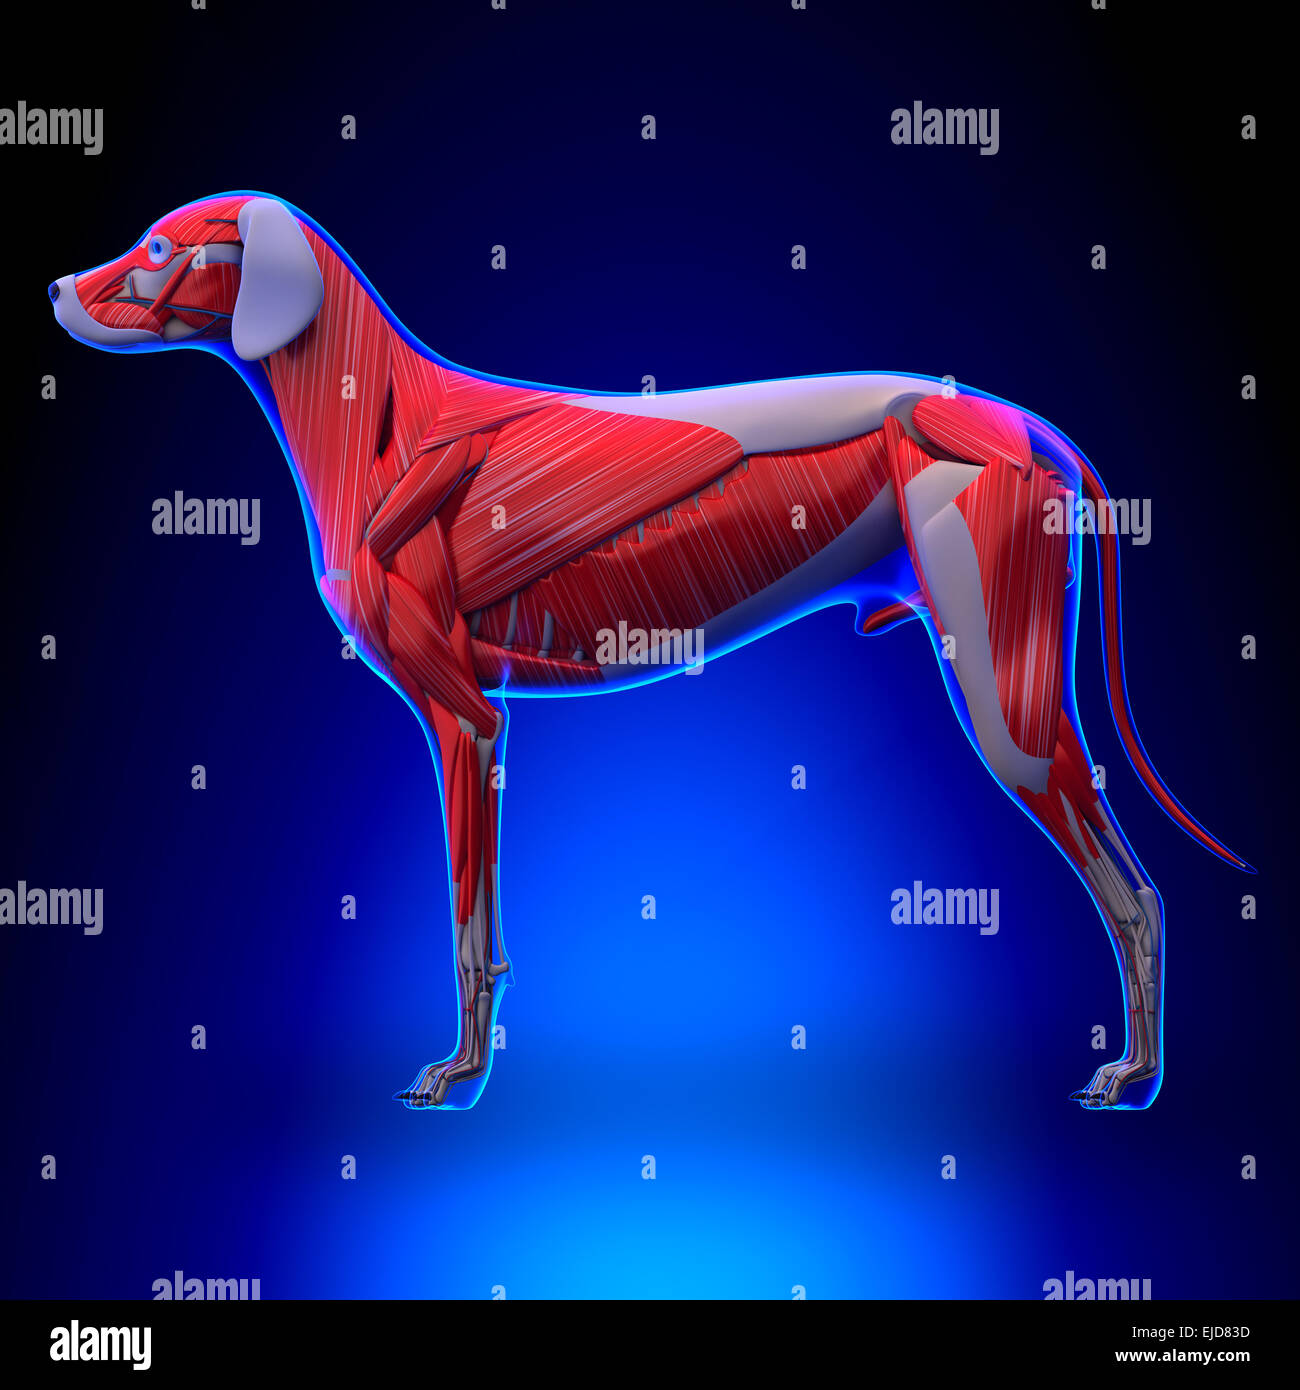 Dog Muscles Anatomy - Muscular System of the Dog Stock Photo